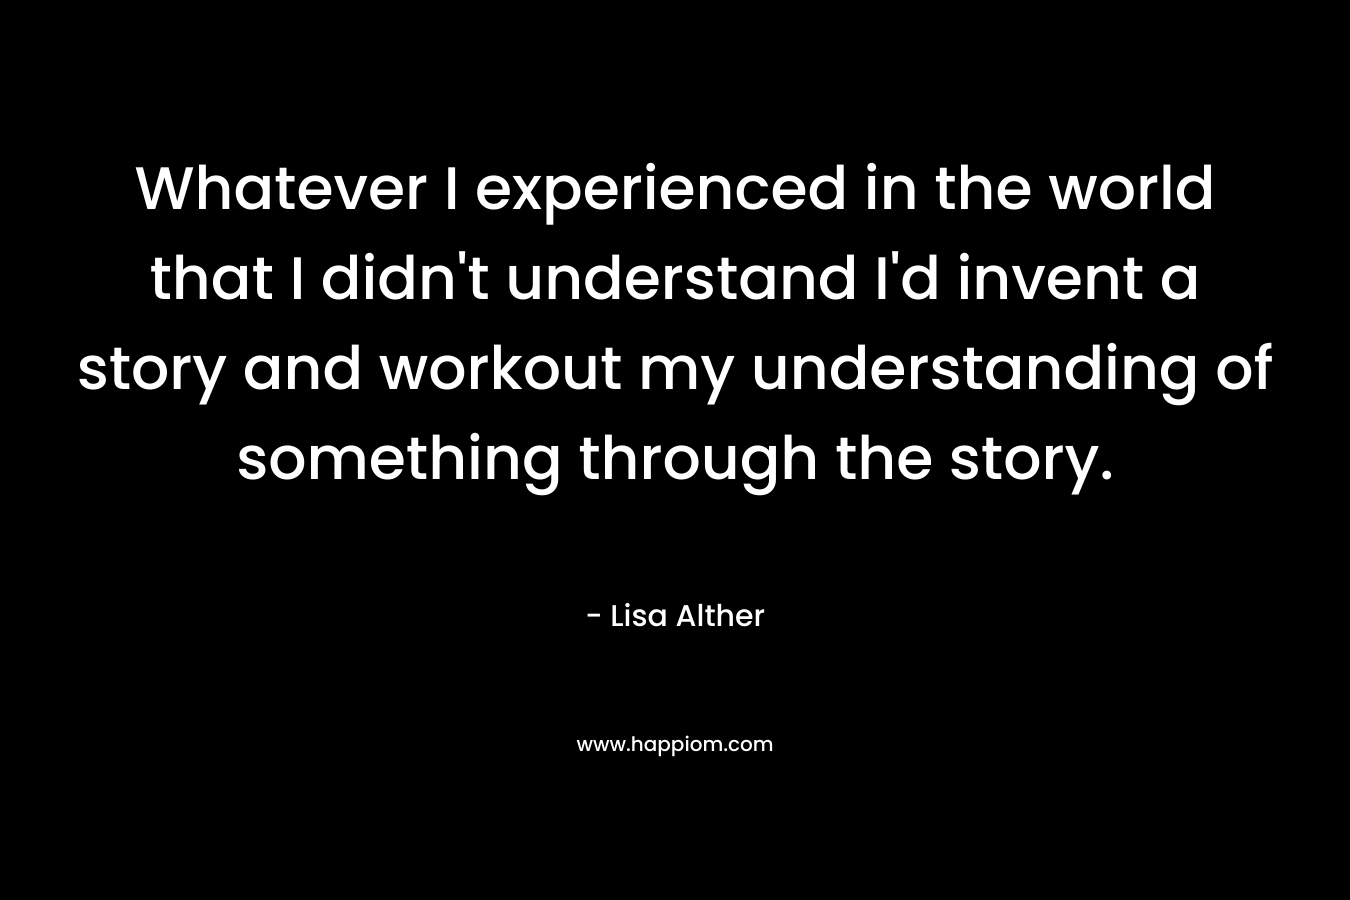 Whatever I experienced in the world that I didn't understand I'd invent a story and workout my understanding of something through the story.